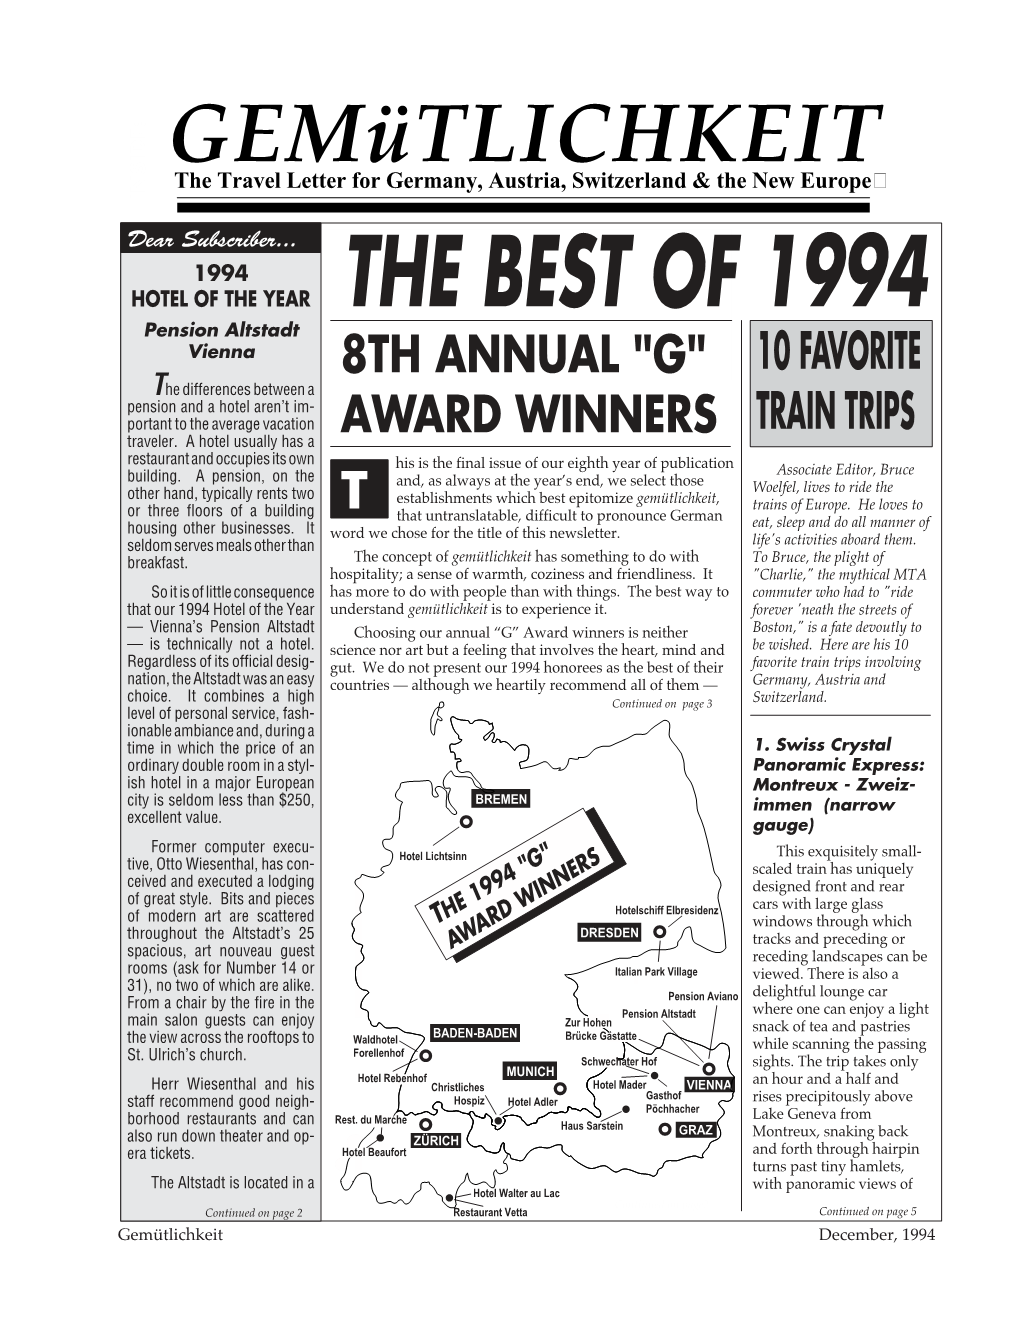 The Best of 1994